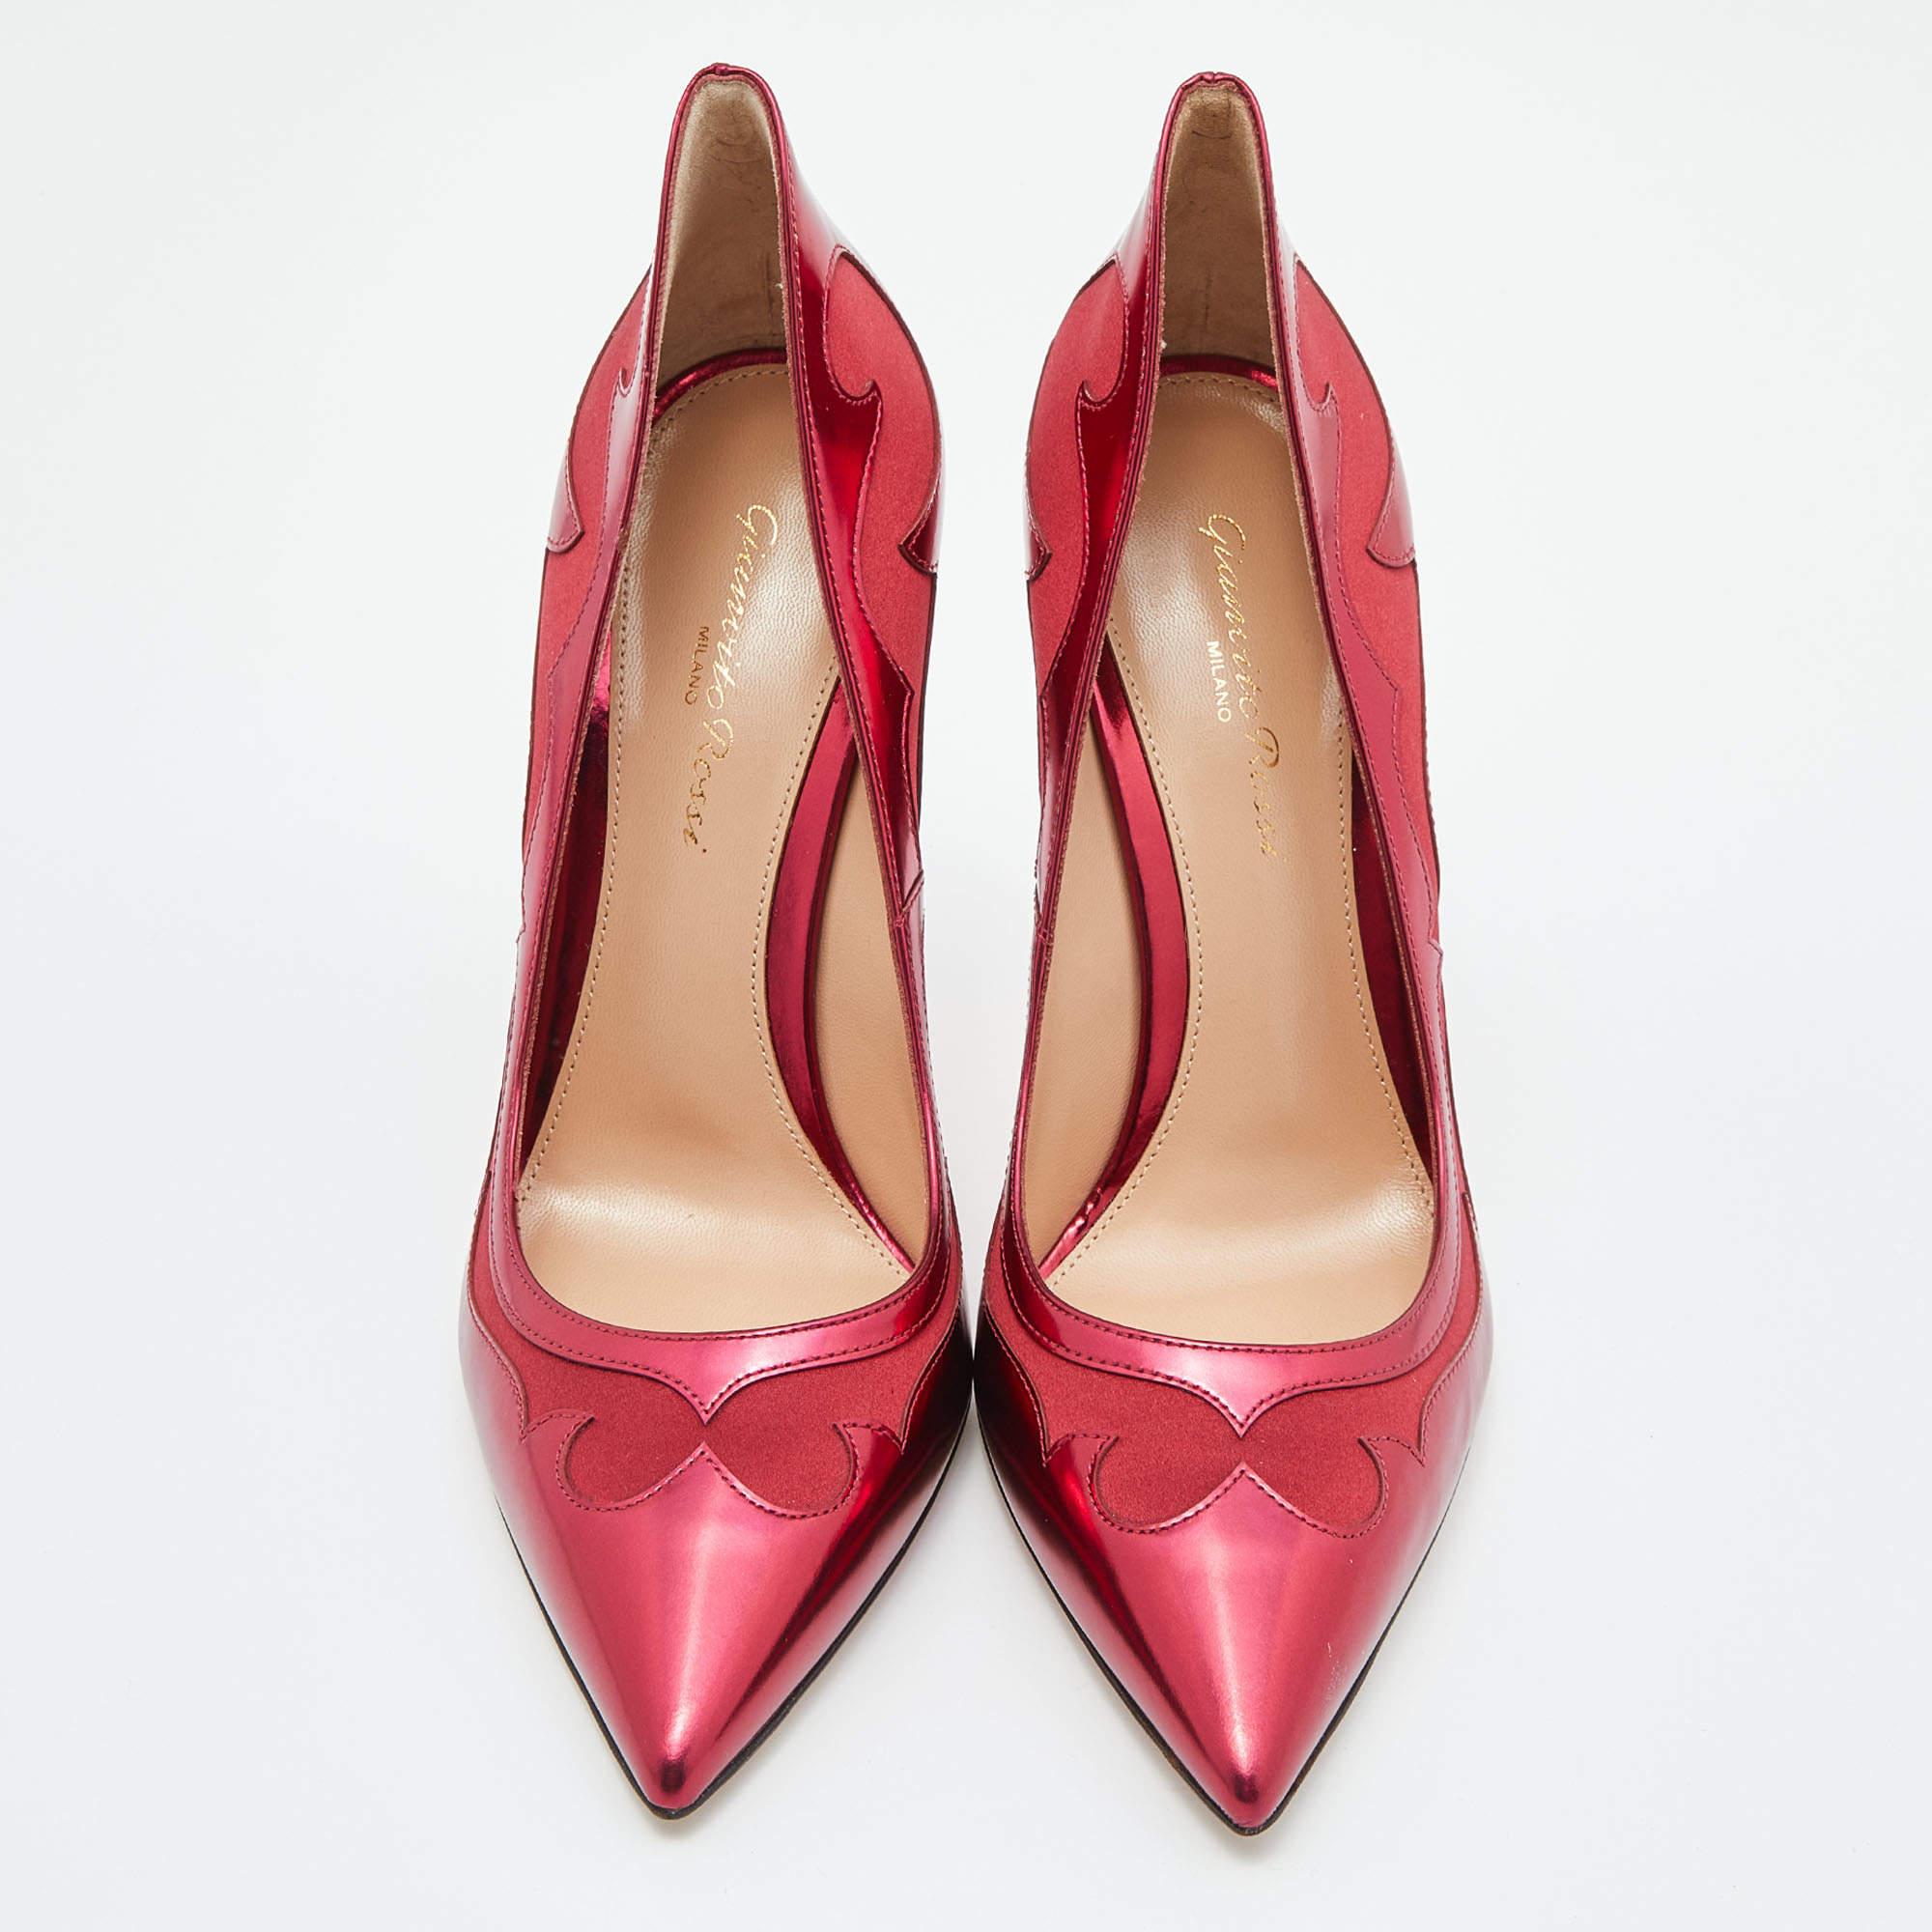 Crafted using leather & satin, these Gianvito Rossi pumps are meant to add a sophisticated finish to your look of the day. The designer pumps feature pointed toes, leather lining, and 10.5 cm heels.

Includes: Original Box, Info Card, Original